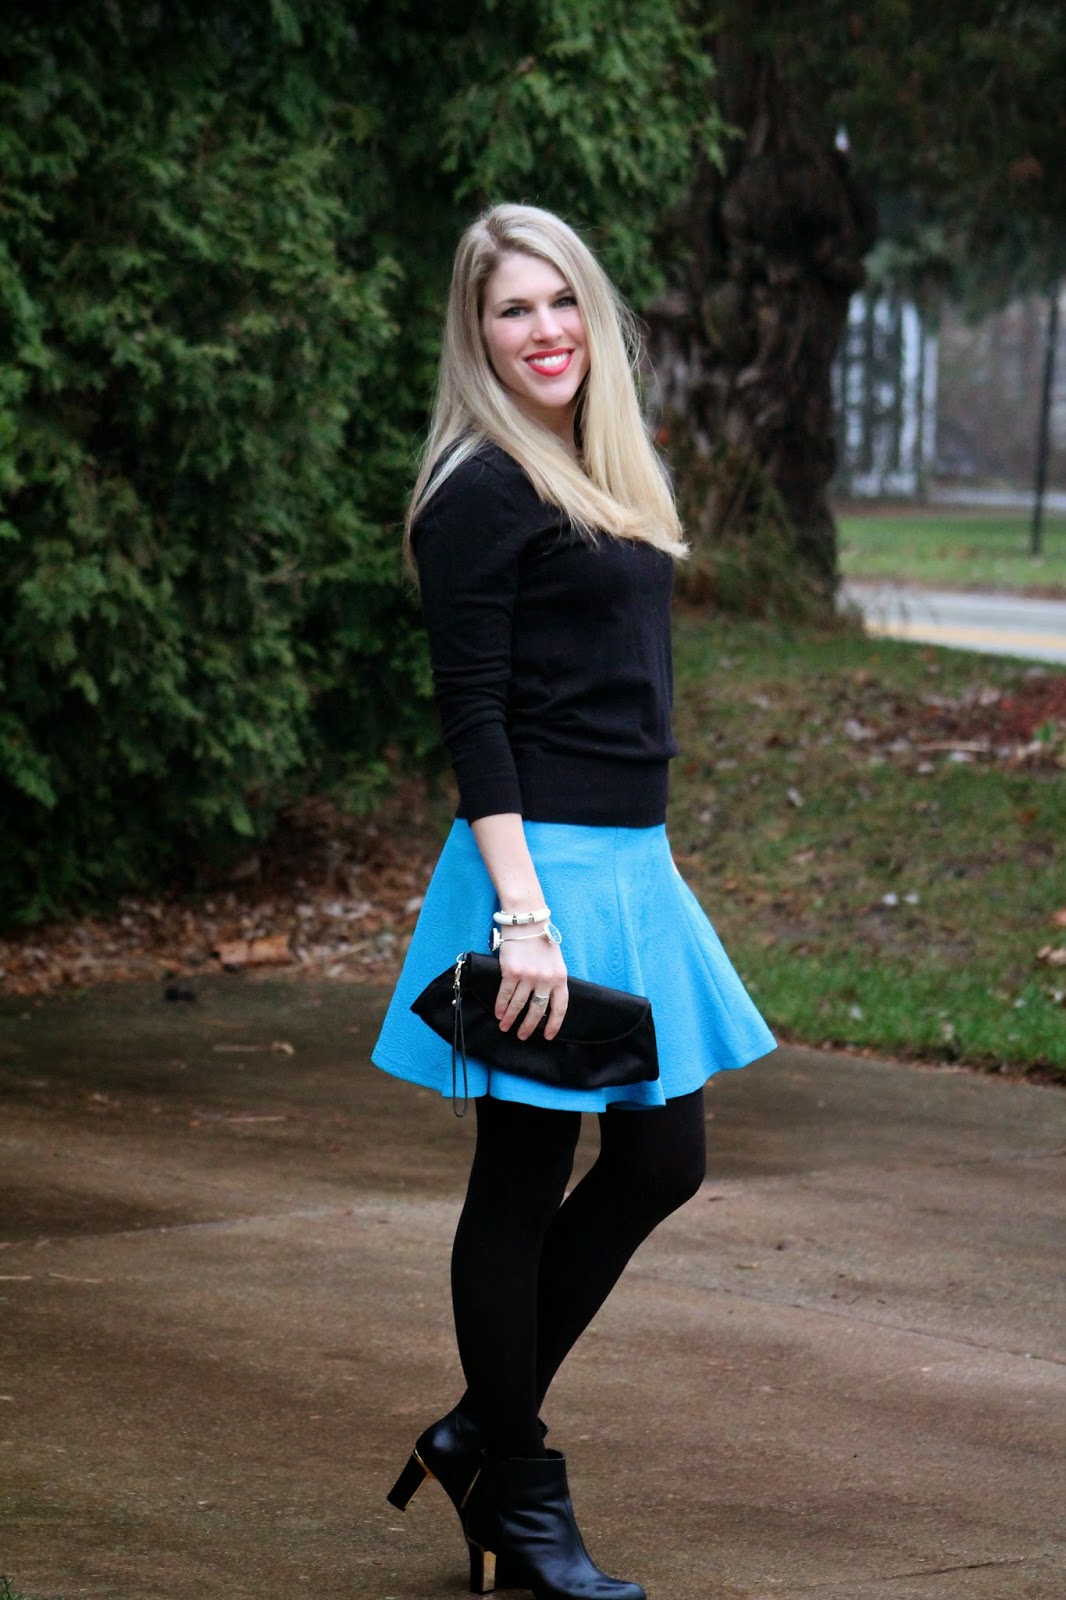 I do deClaire: Turquoise Skirt and Embellished Sweater